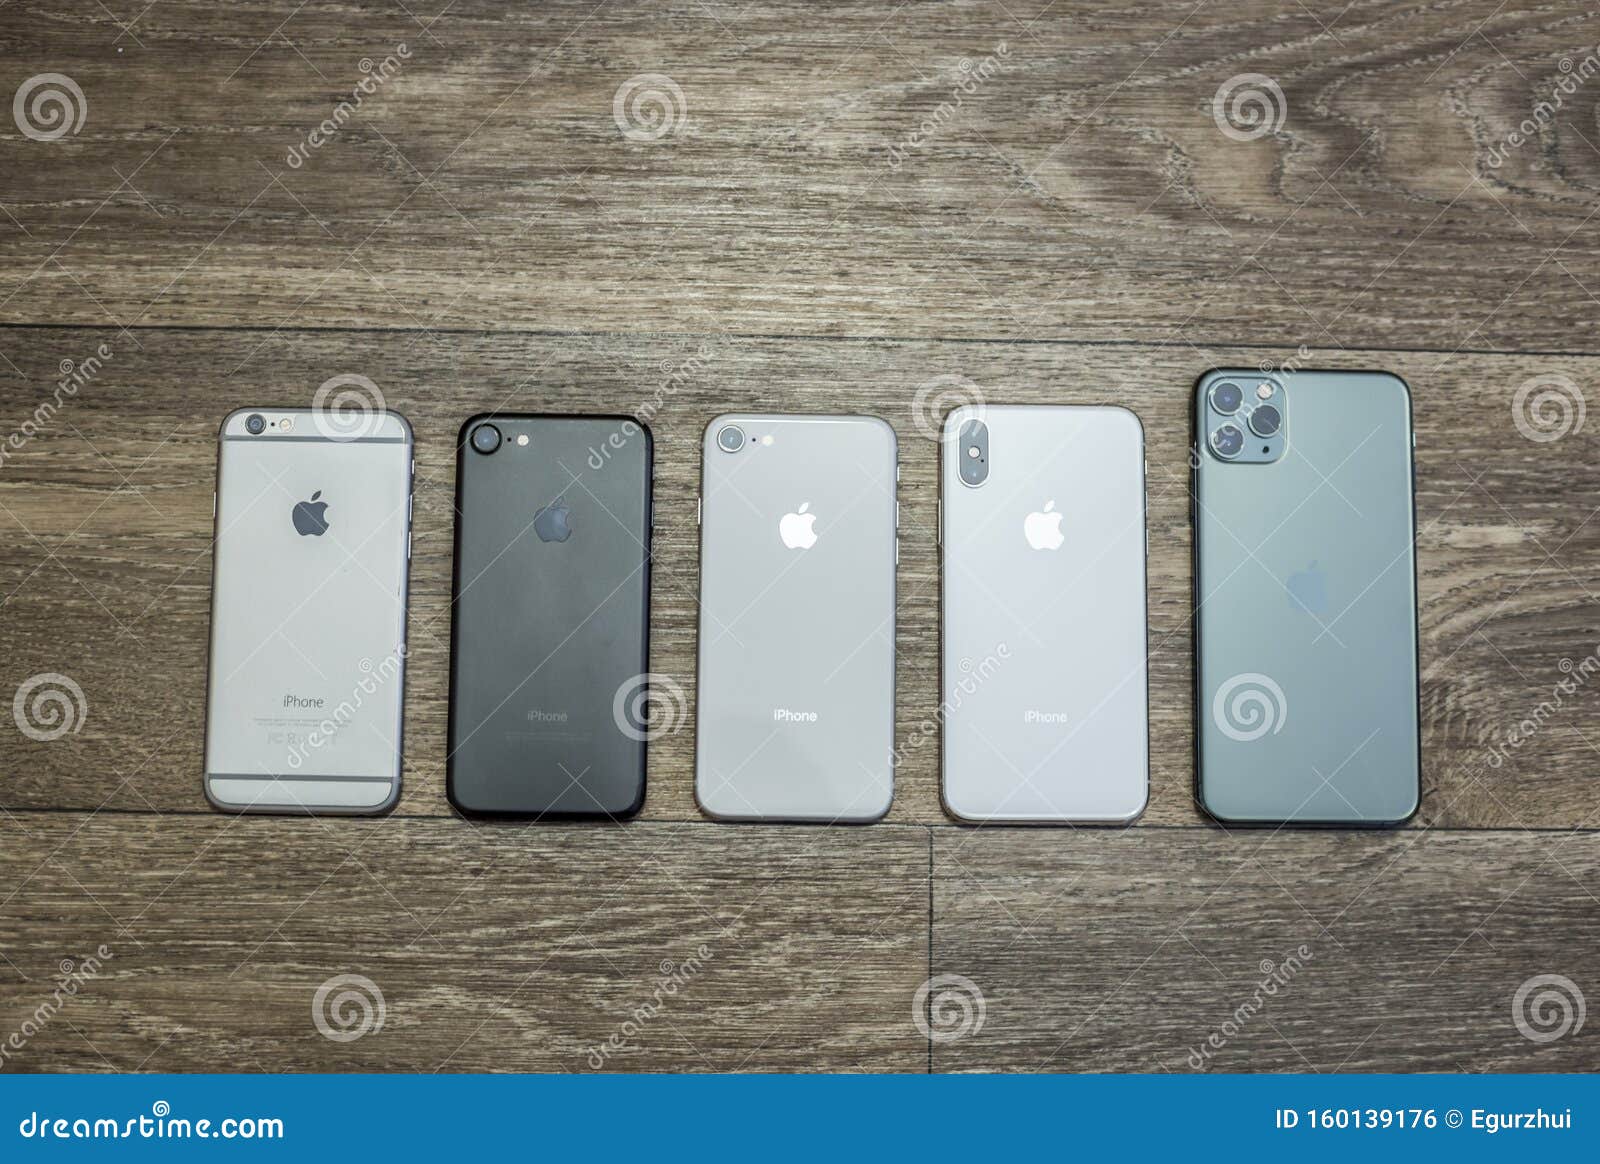 IPhone 6 through IPhone 11 Pro MAX Lineup. Editorial Photo - Image of  gadget, model: 160139176